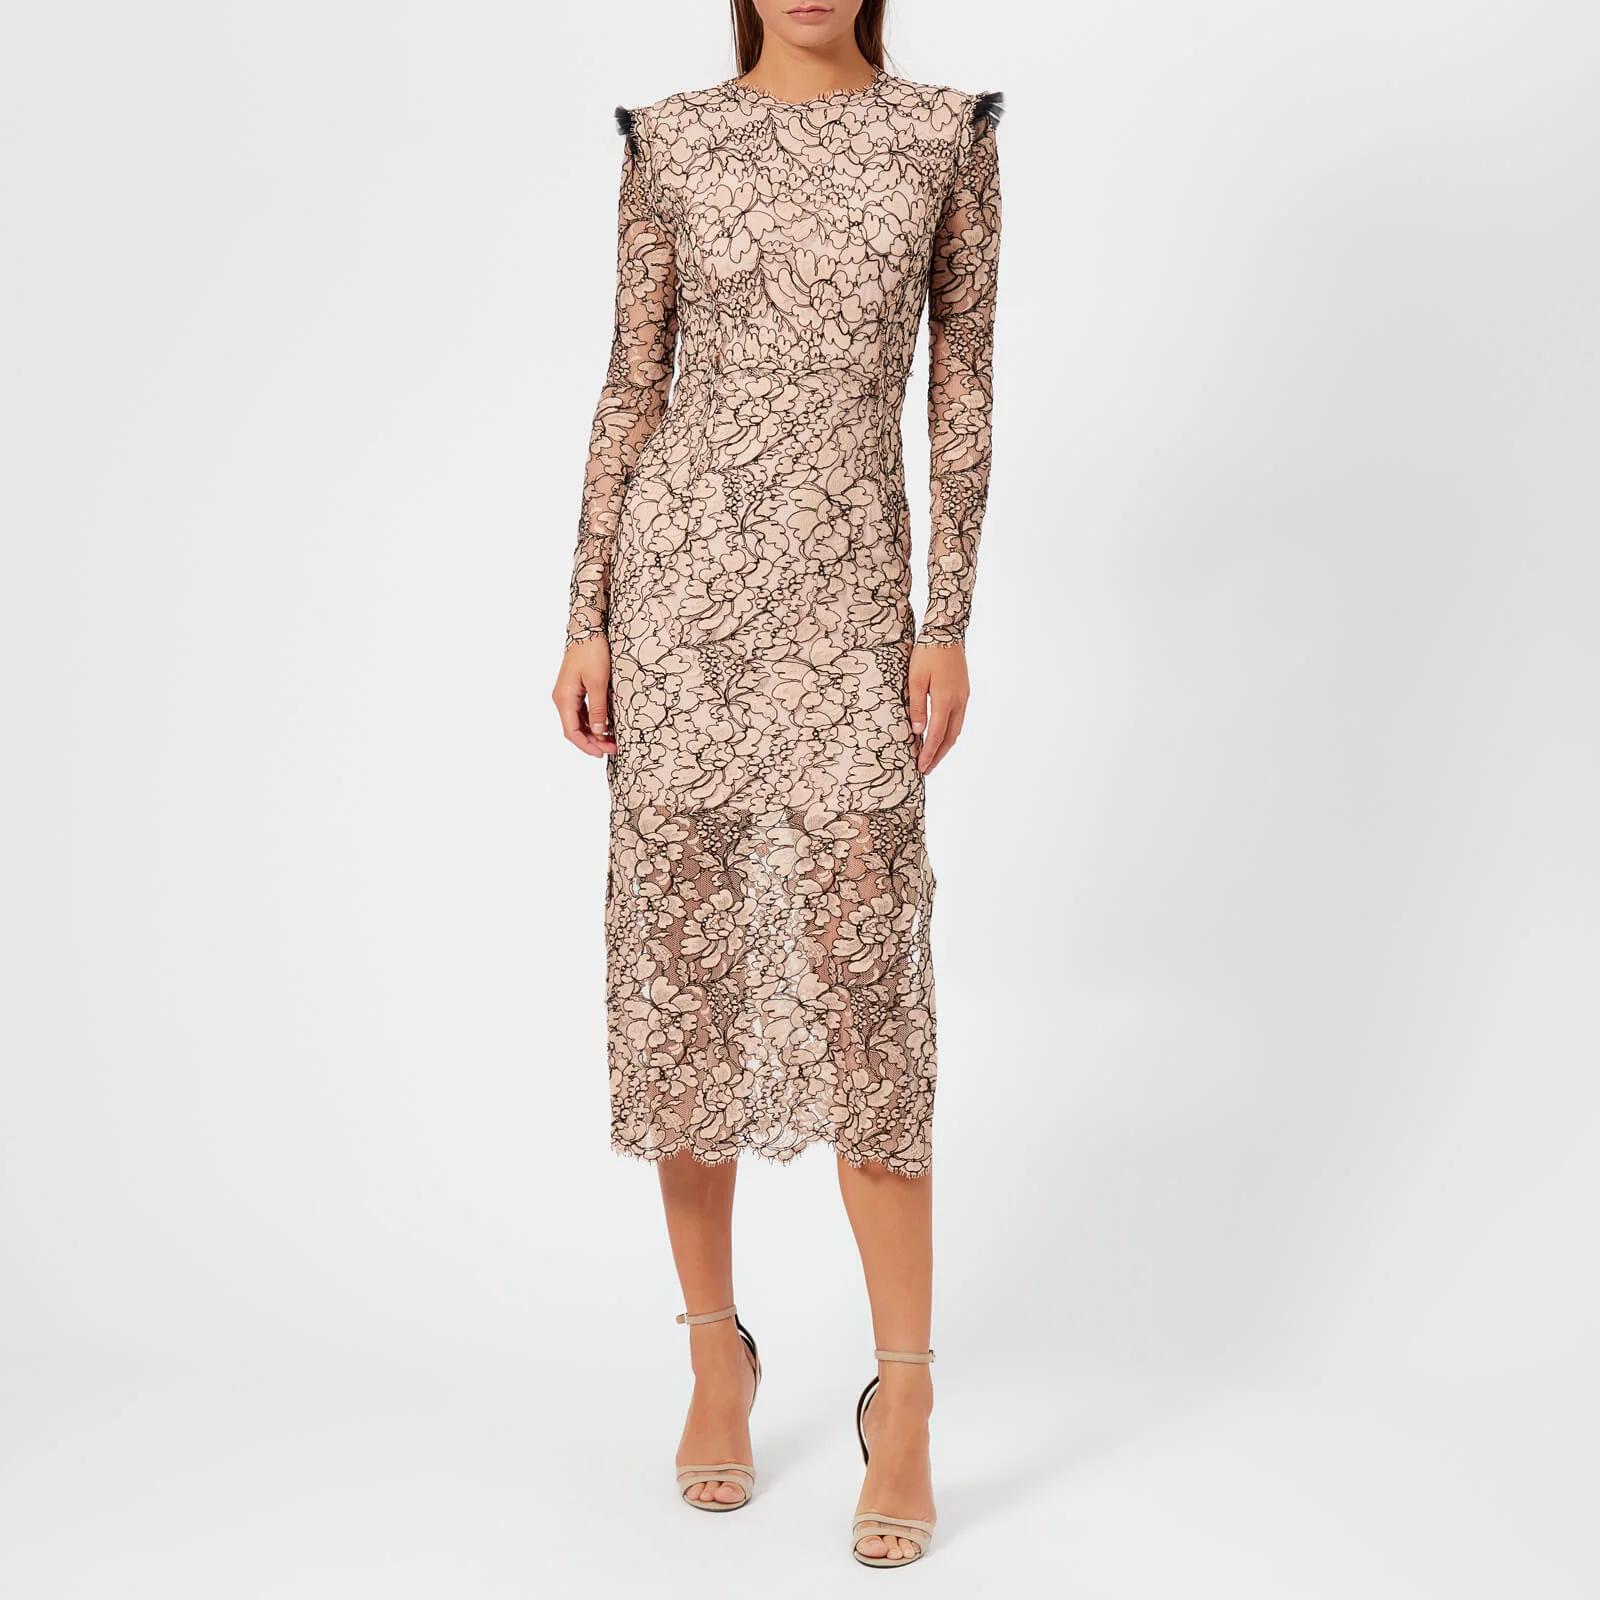 Preen By Thornton Bregazzi Women's French Corded Lace Cameron Dress - Nude Image 1